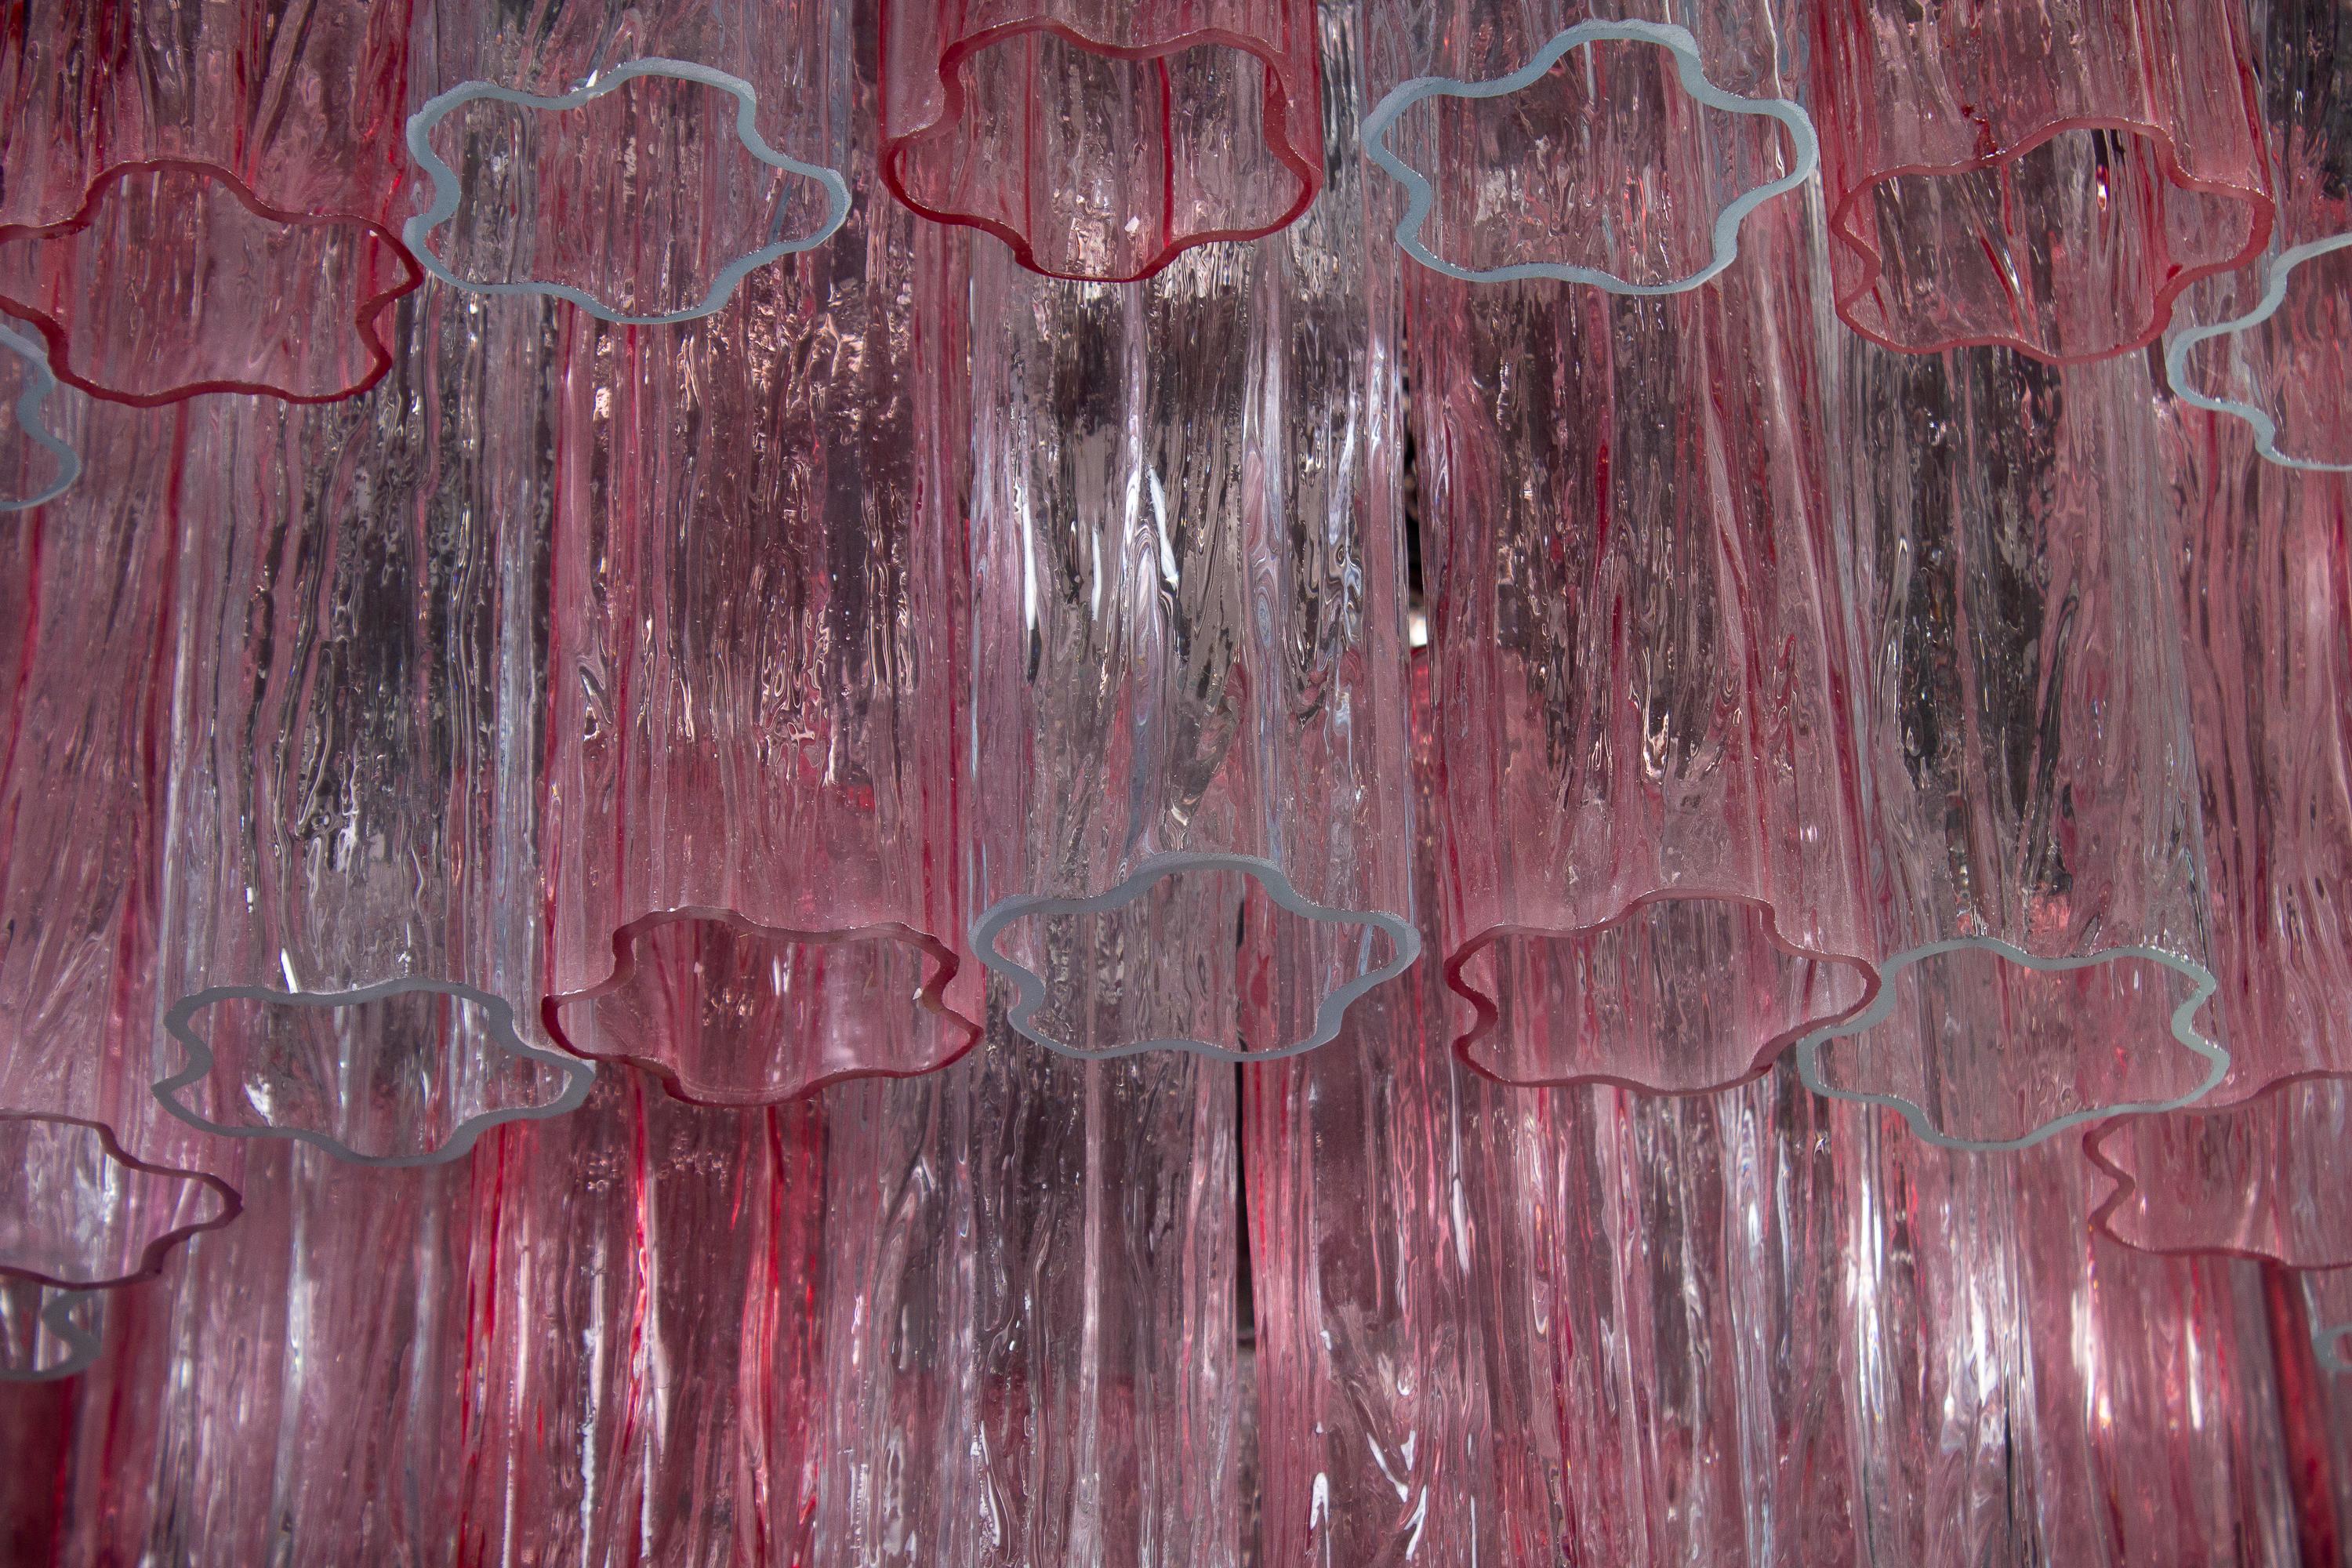 Pink and Ice Color Large Italian Murano Glass Tronchi Chandelier For Sale 8